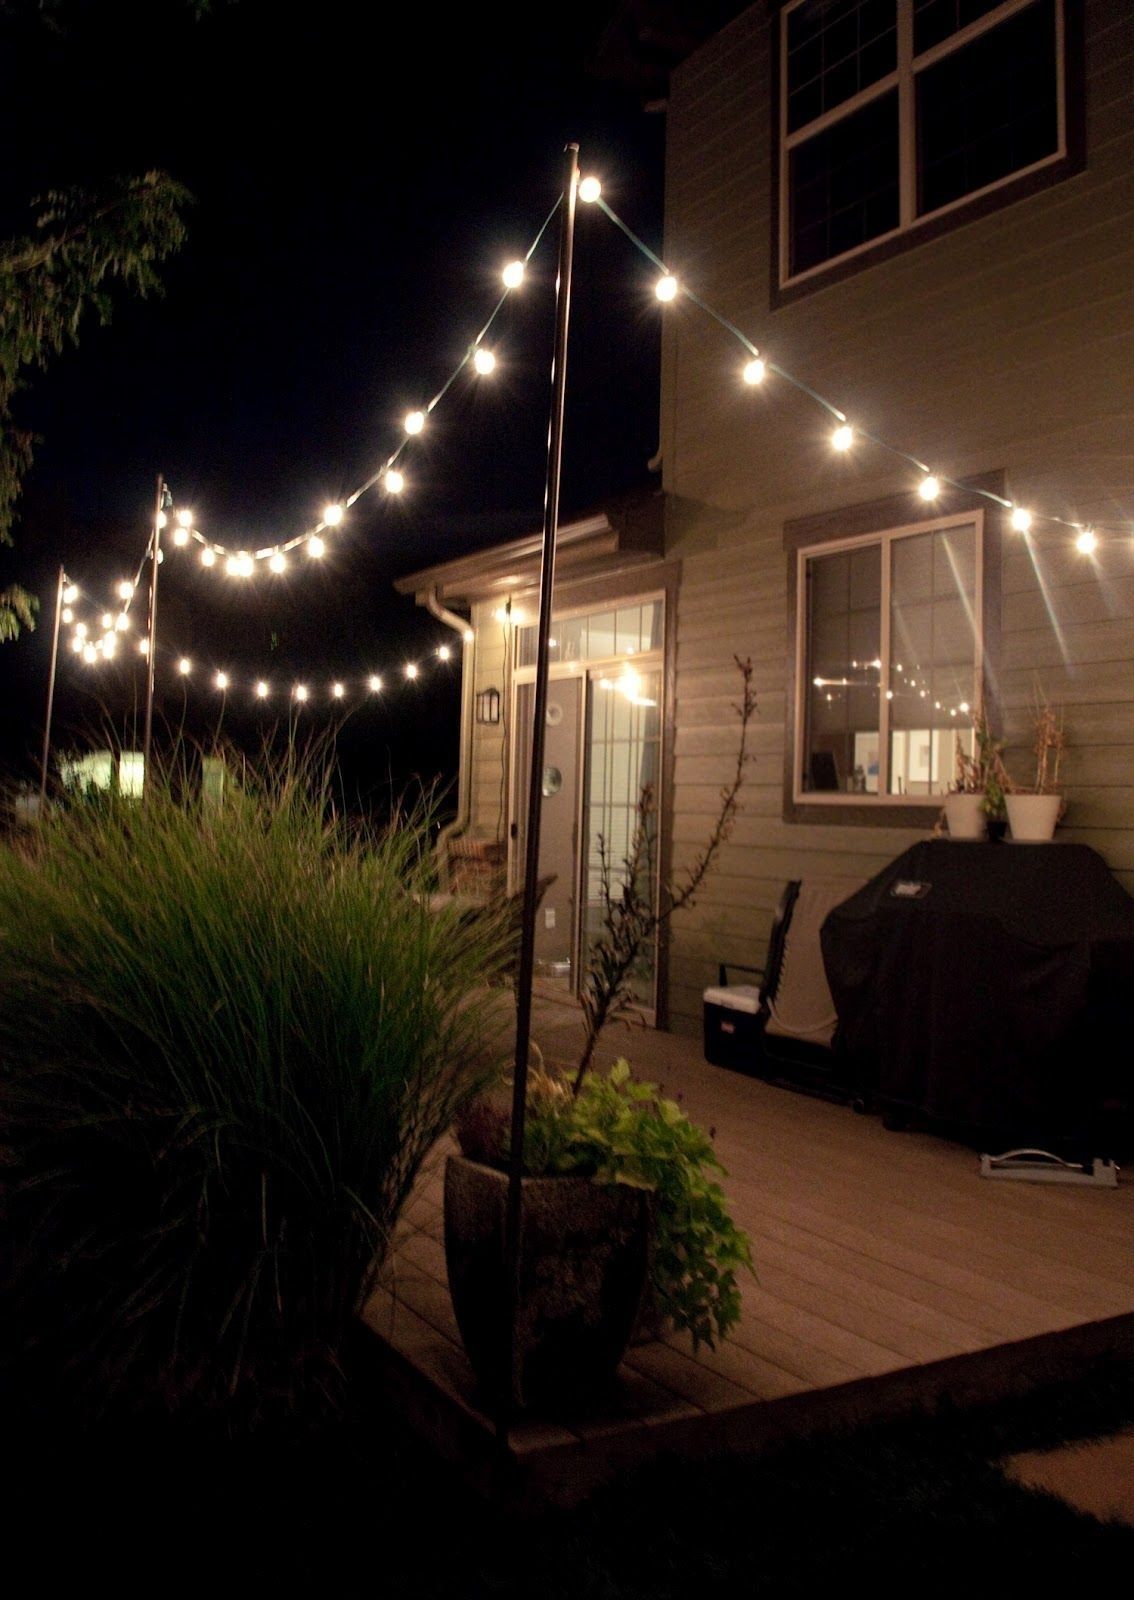 8 Outdoor Lighting Ideas In 2018 To Inspire Your Backyard Makeover Inside Hanging Outdoor Lights On Fence (View 13 of 15)